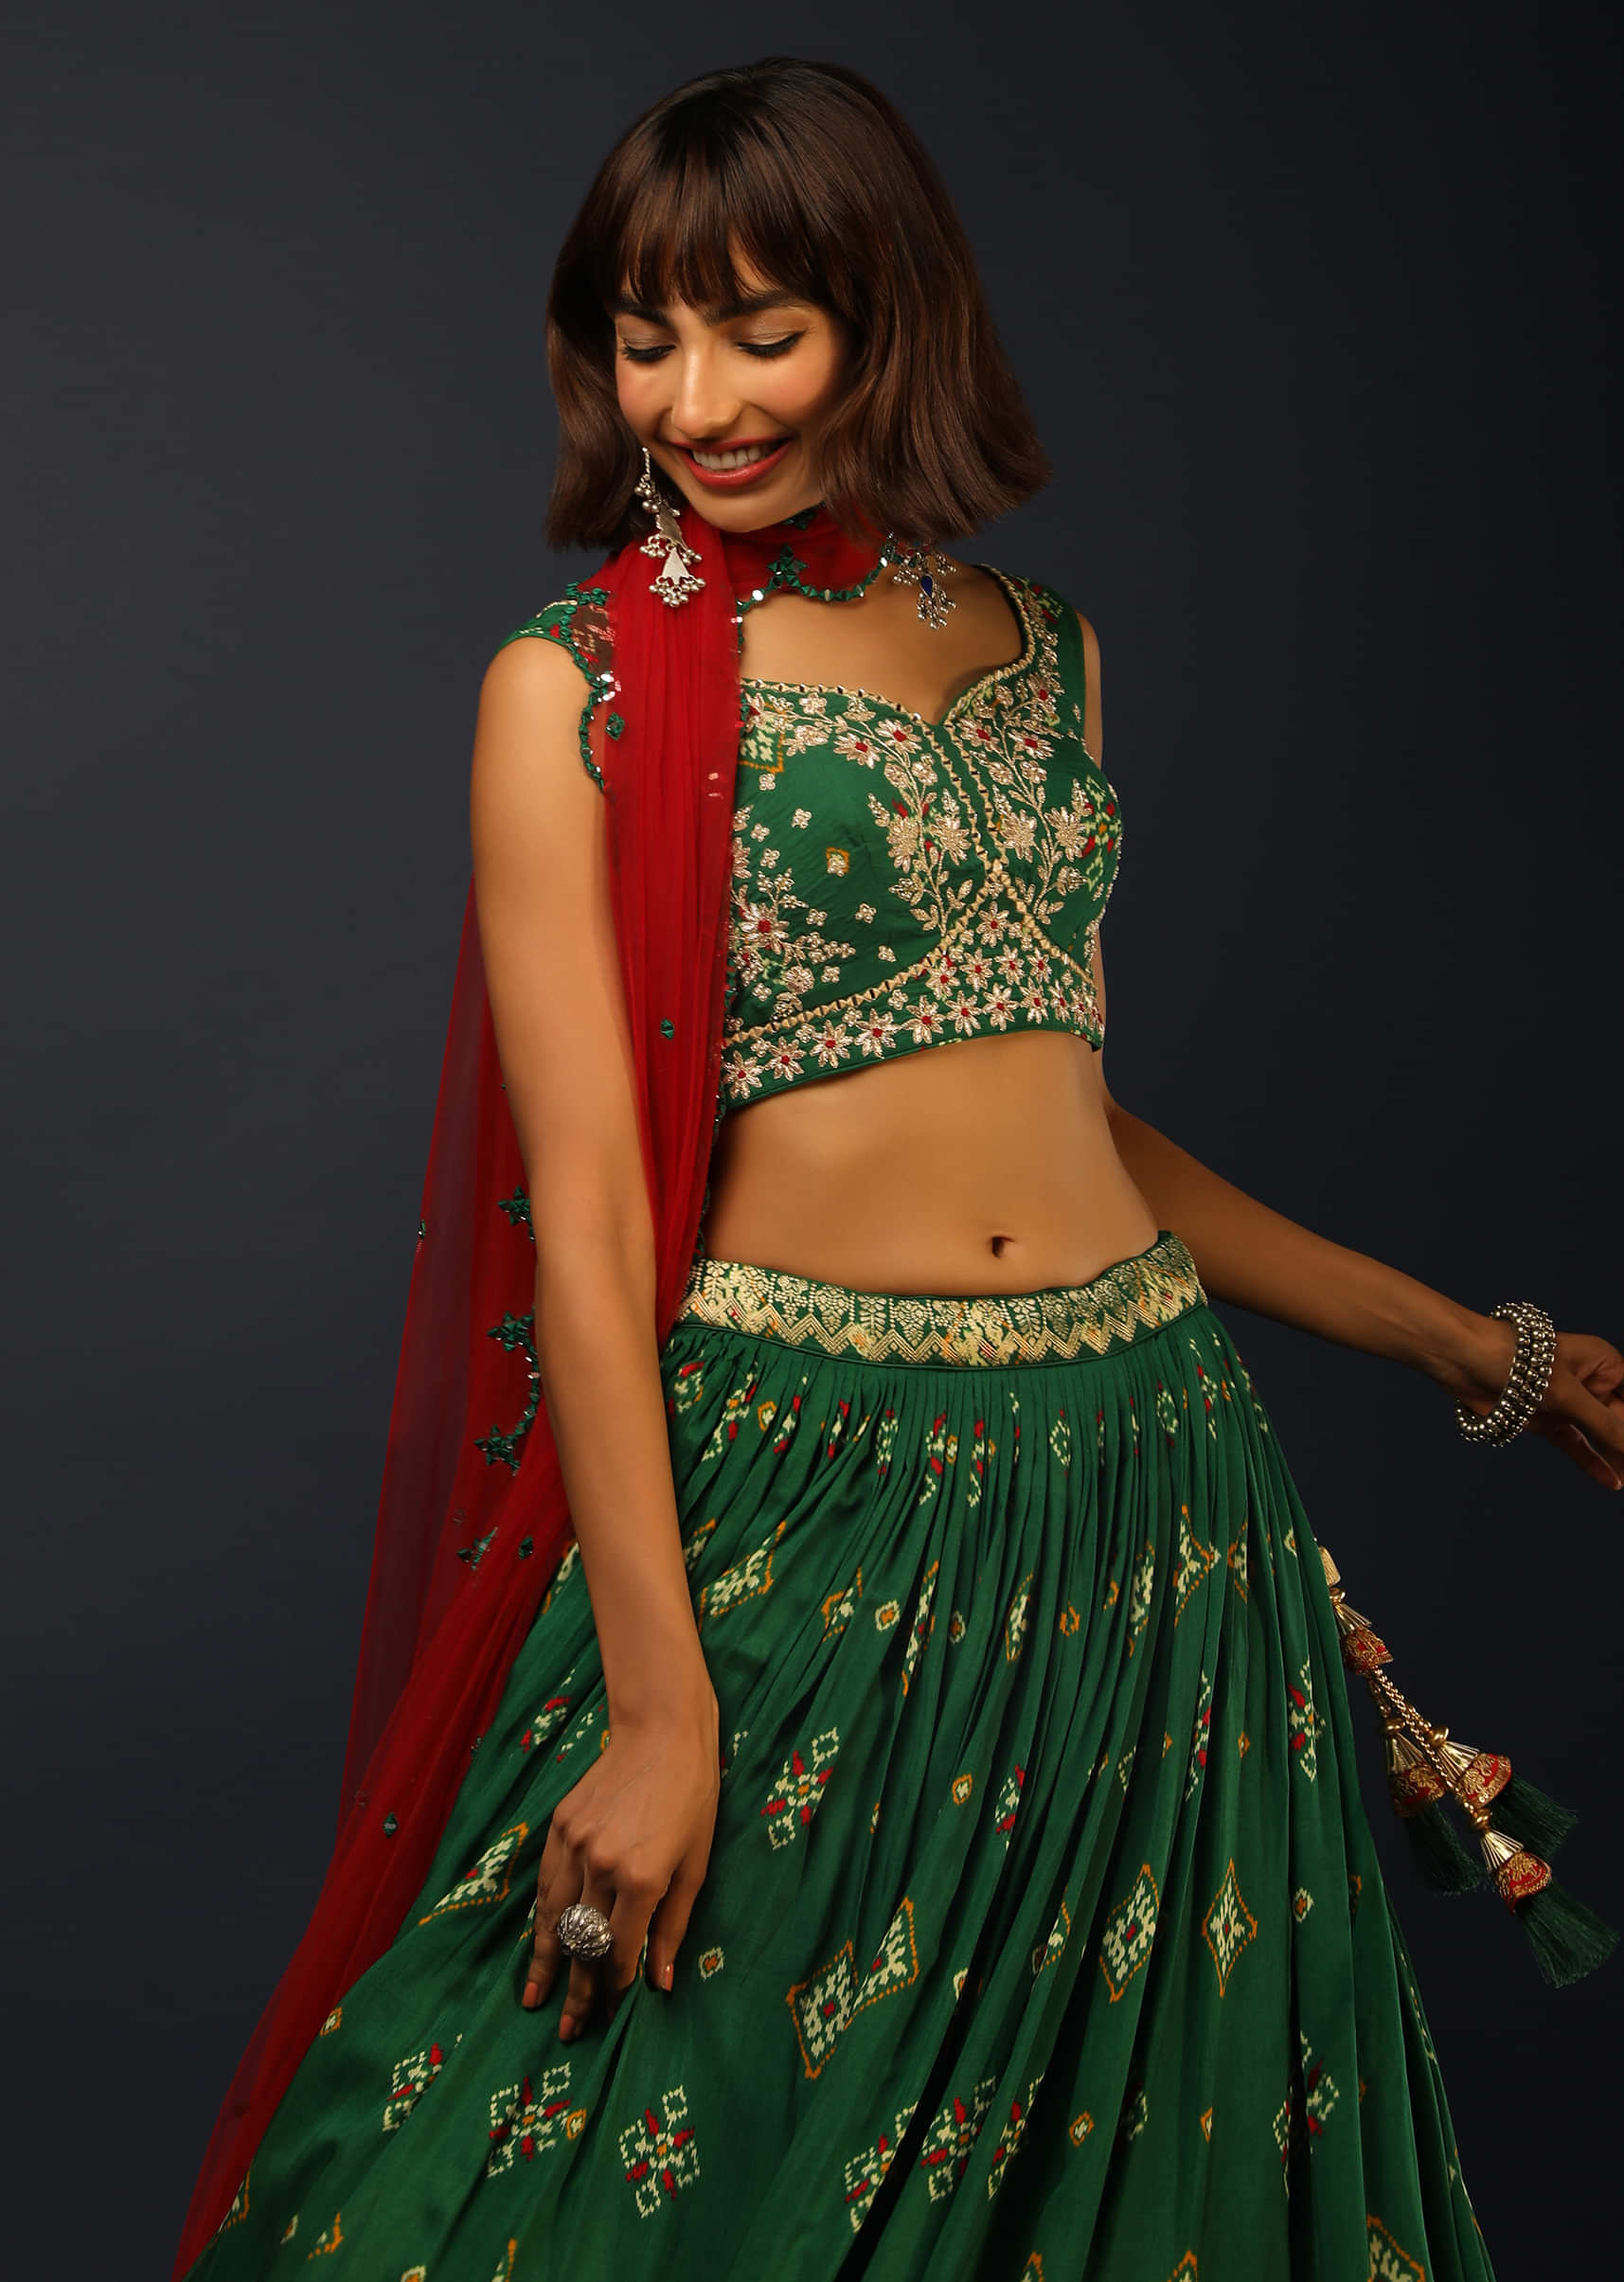 Bottle Green Lehenga In Silk With Patola Printed Buttis And Woven Maroon Border 